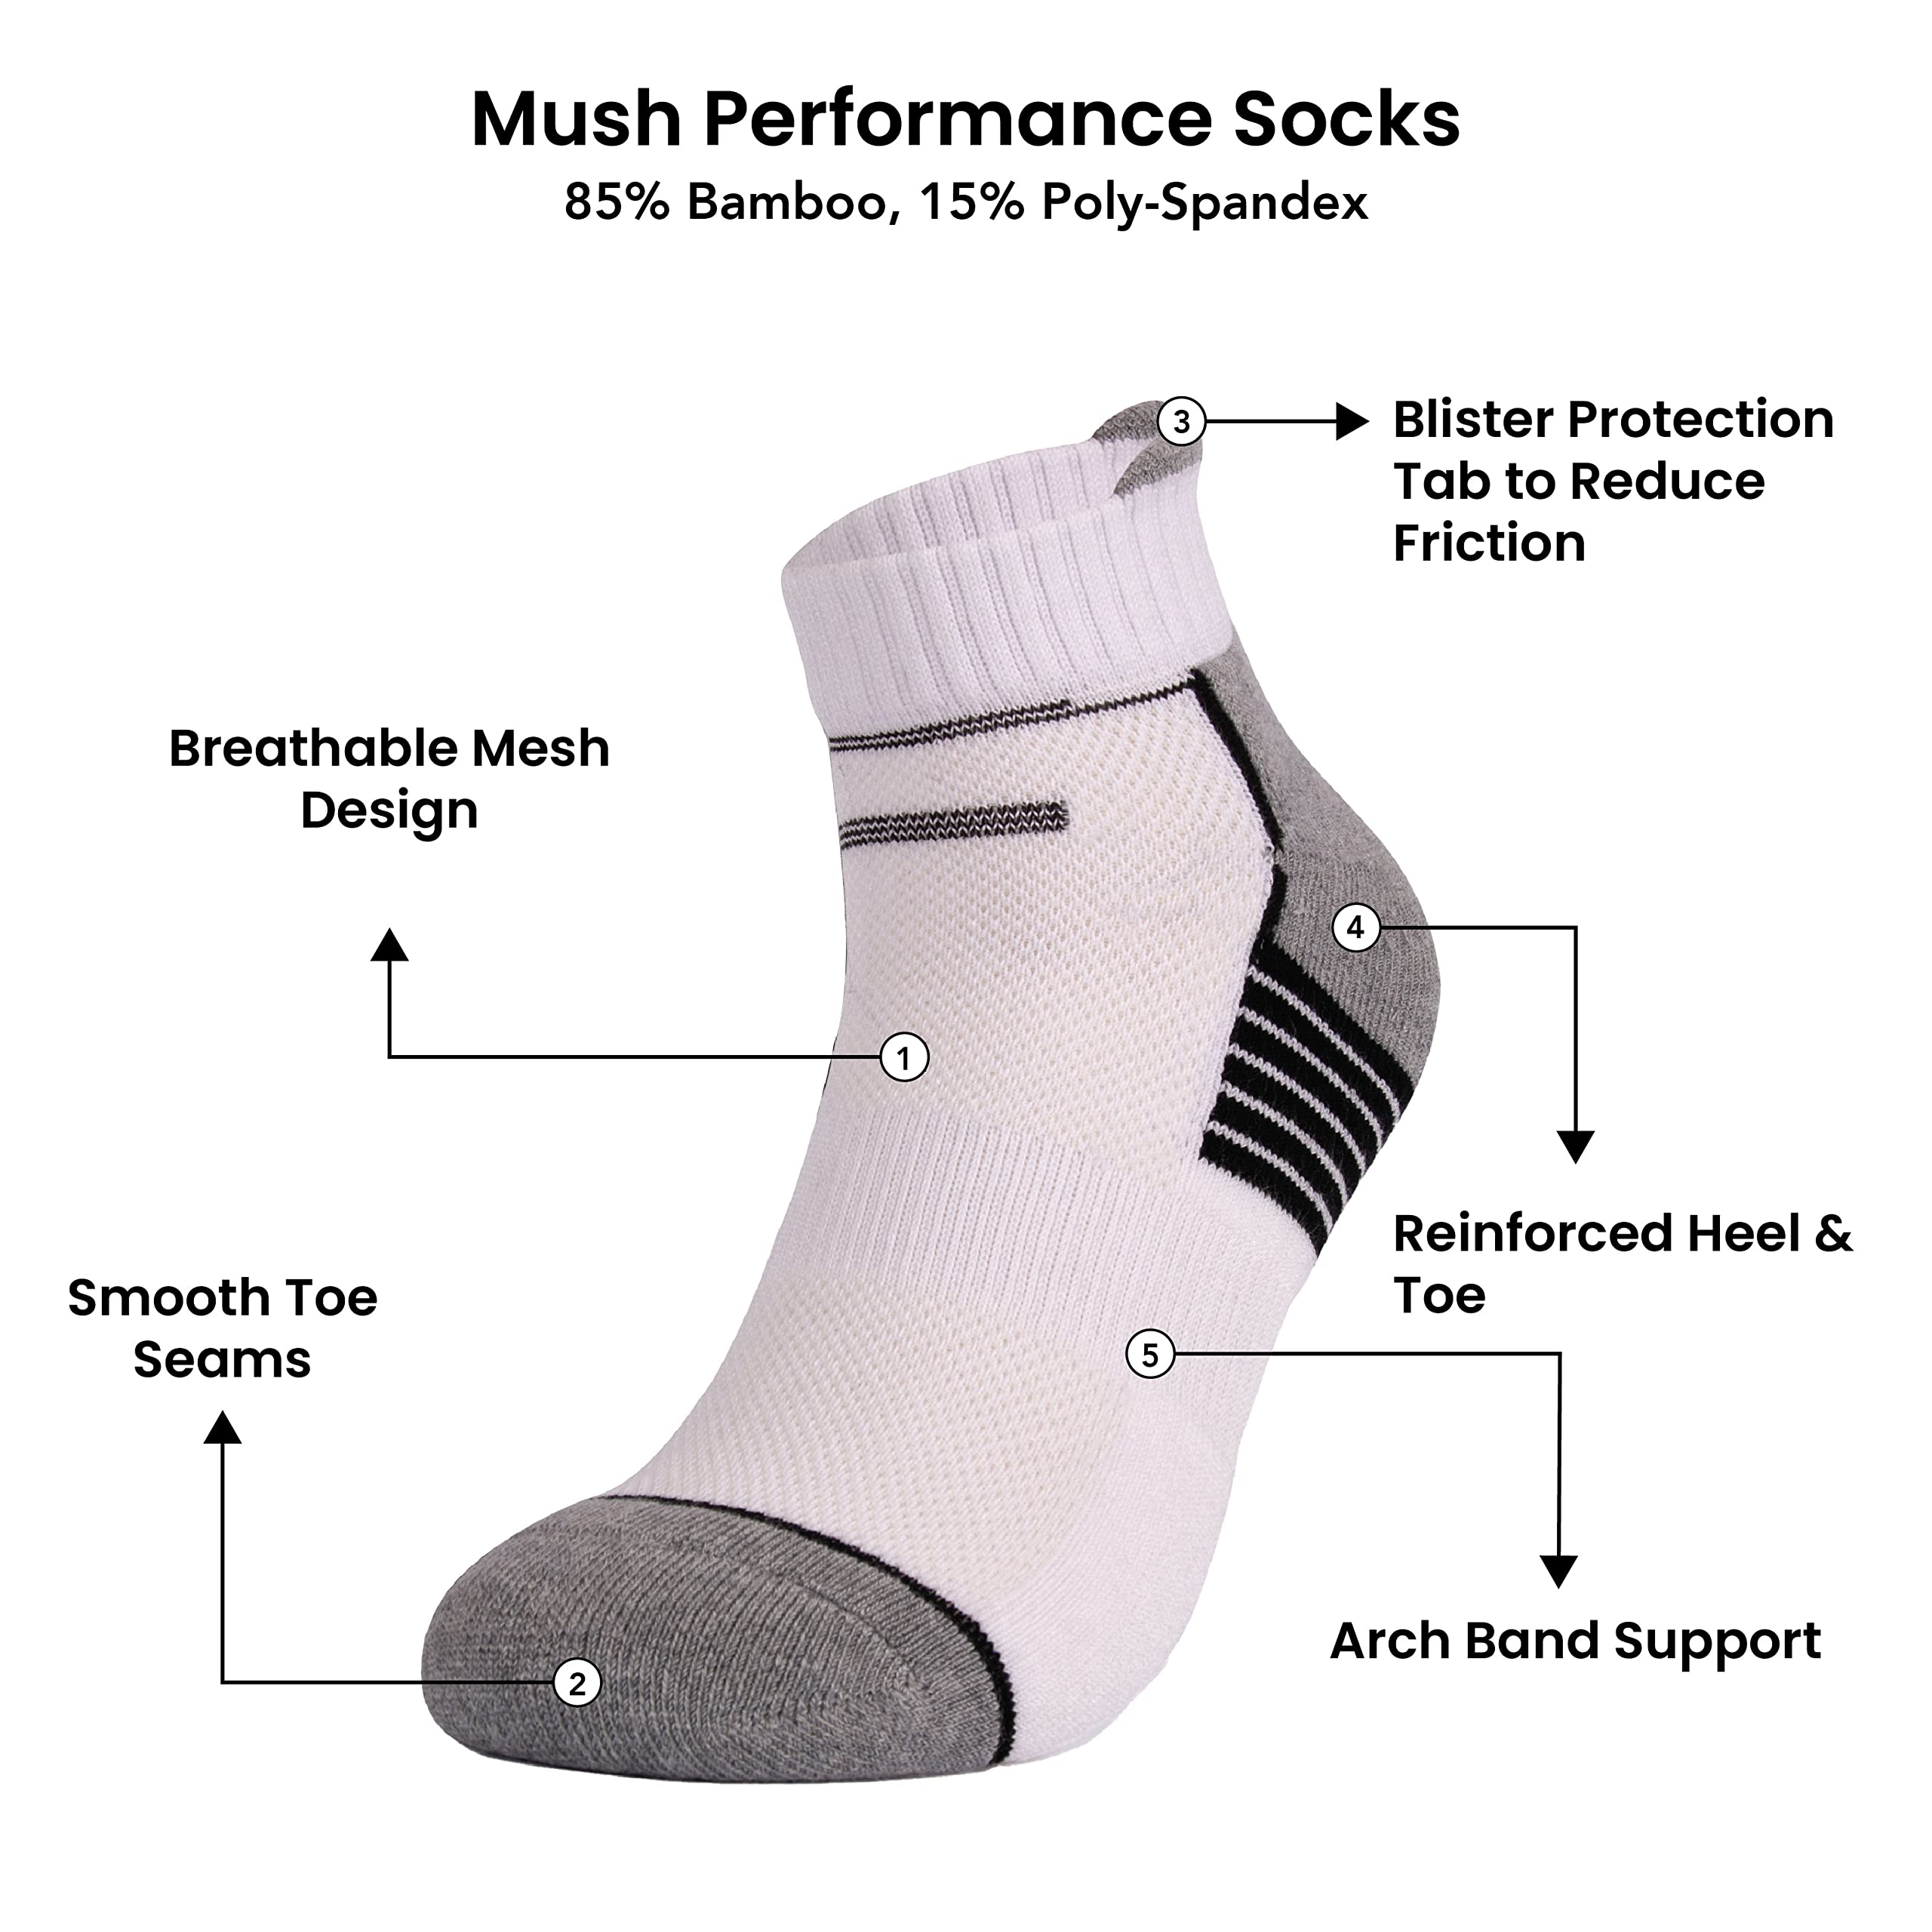 Mush Bamboo Performance Socks for Men || Sports & Casual Wear Ultra Soft, Anti Odor, Breathable Ankle Length Pack of 3 UK Size 6-10 (Black, Dark Grey, Navy Blue & Dark Grey, Navy Blue, Light Grey, 6)